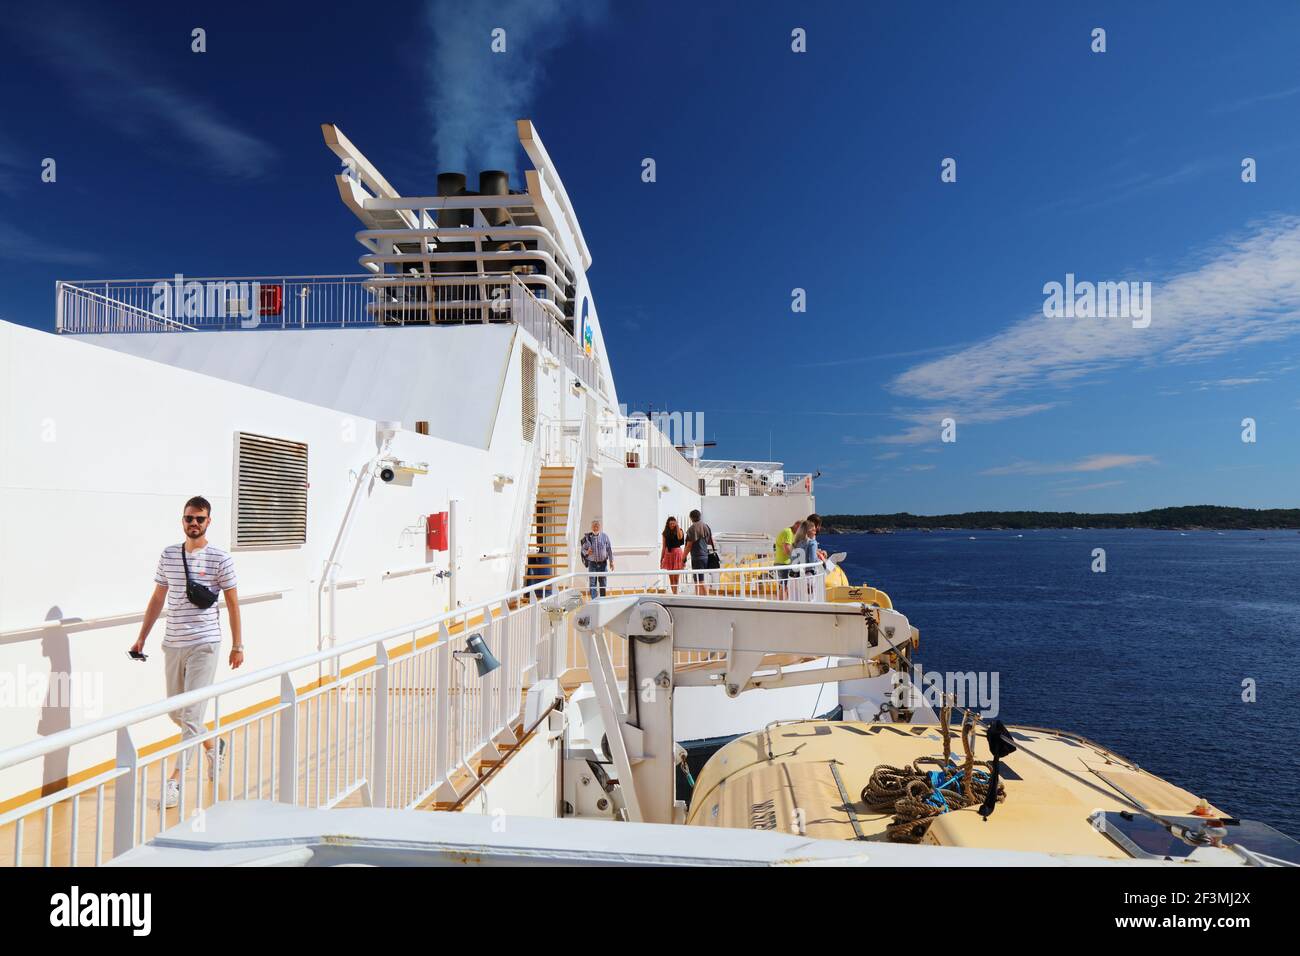 Shopping mall cruise ship MS Color Fantasy, Color Line shipping company,  Oslo, Norway, Europe, Stock Photo, Picture And Rights Managed Image. Pic.  IBR-5821912